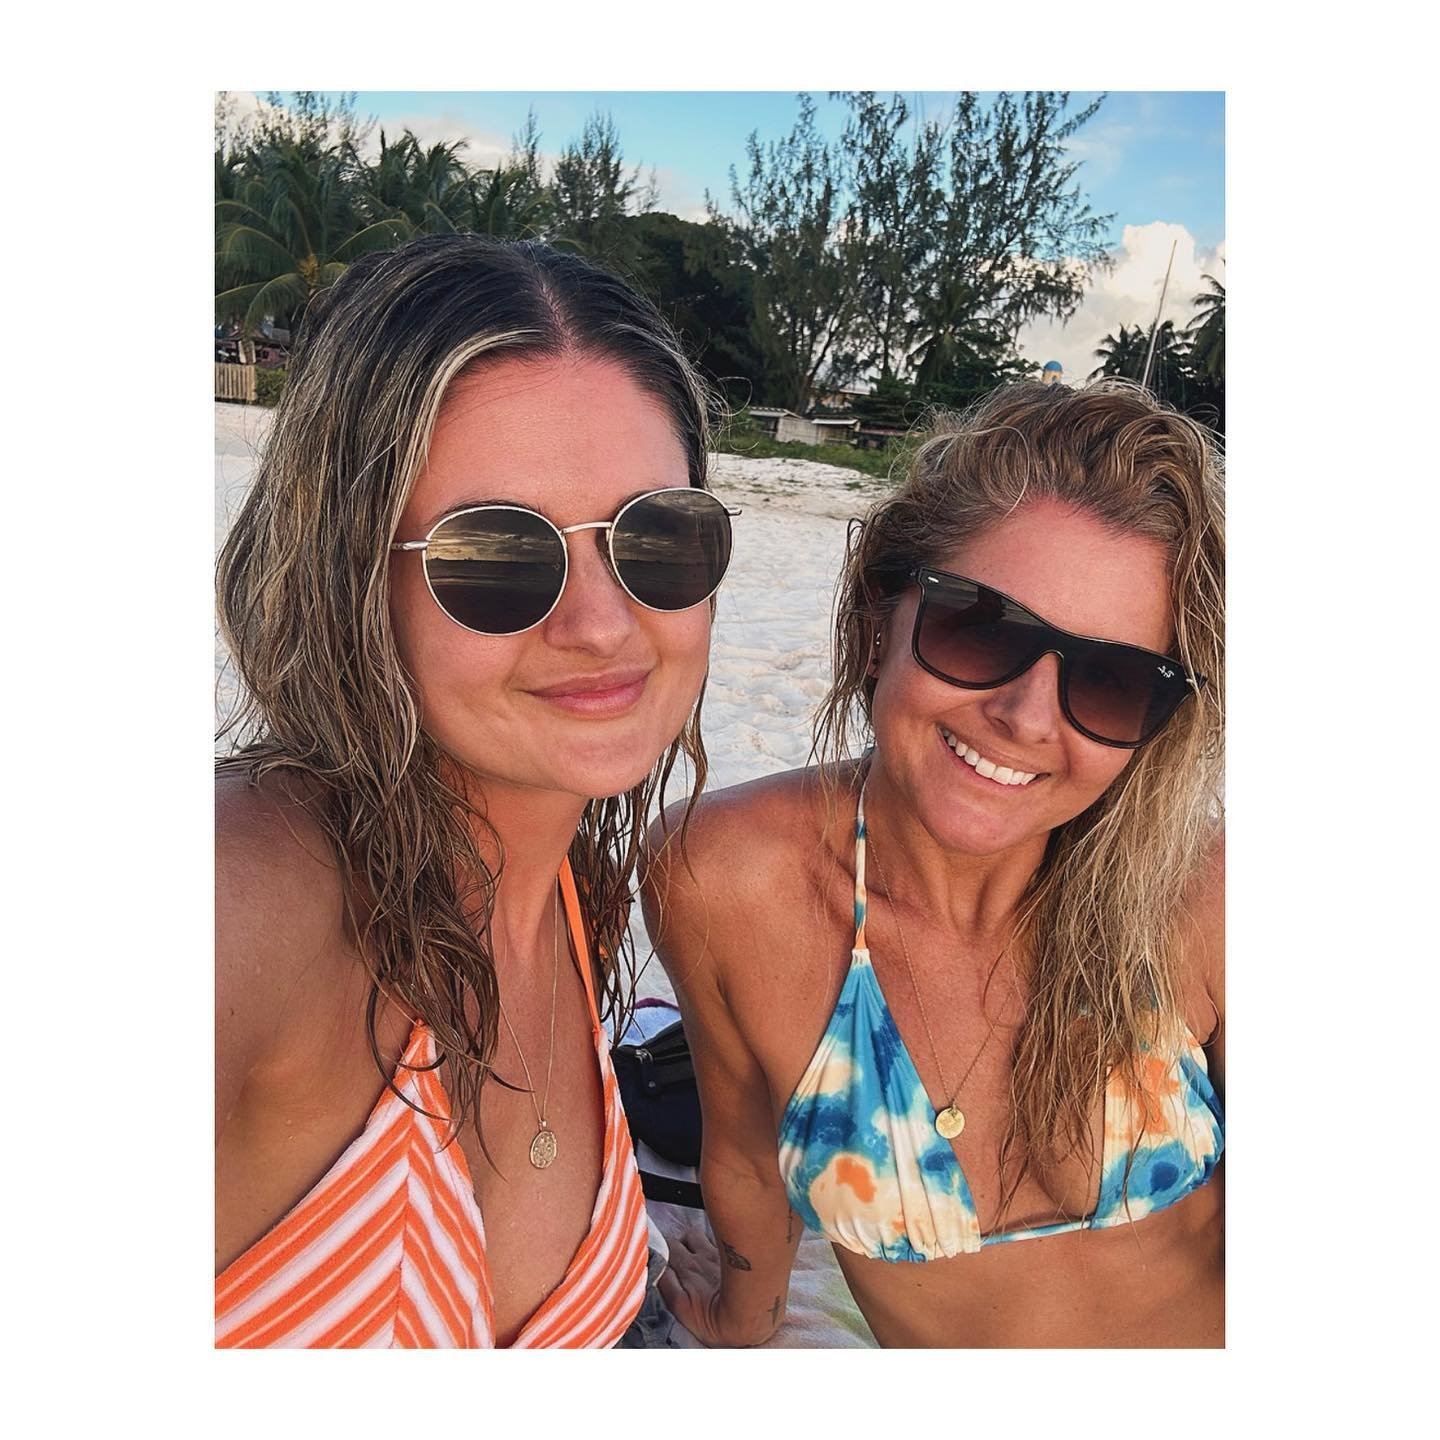 Only my little sis and number one sidekick @katie_childs could get stung by a Jelly Fish, bitten all over by 🦟, stub her toe, have a big 🪳 run over her face when she&rsquo;s sleeping and blister her big toe kicking a poisonous apple&hellip;. Here&r